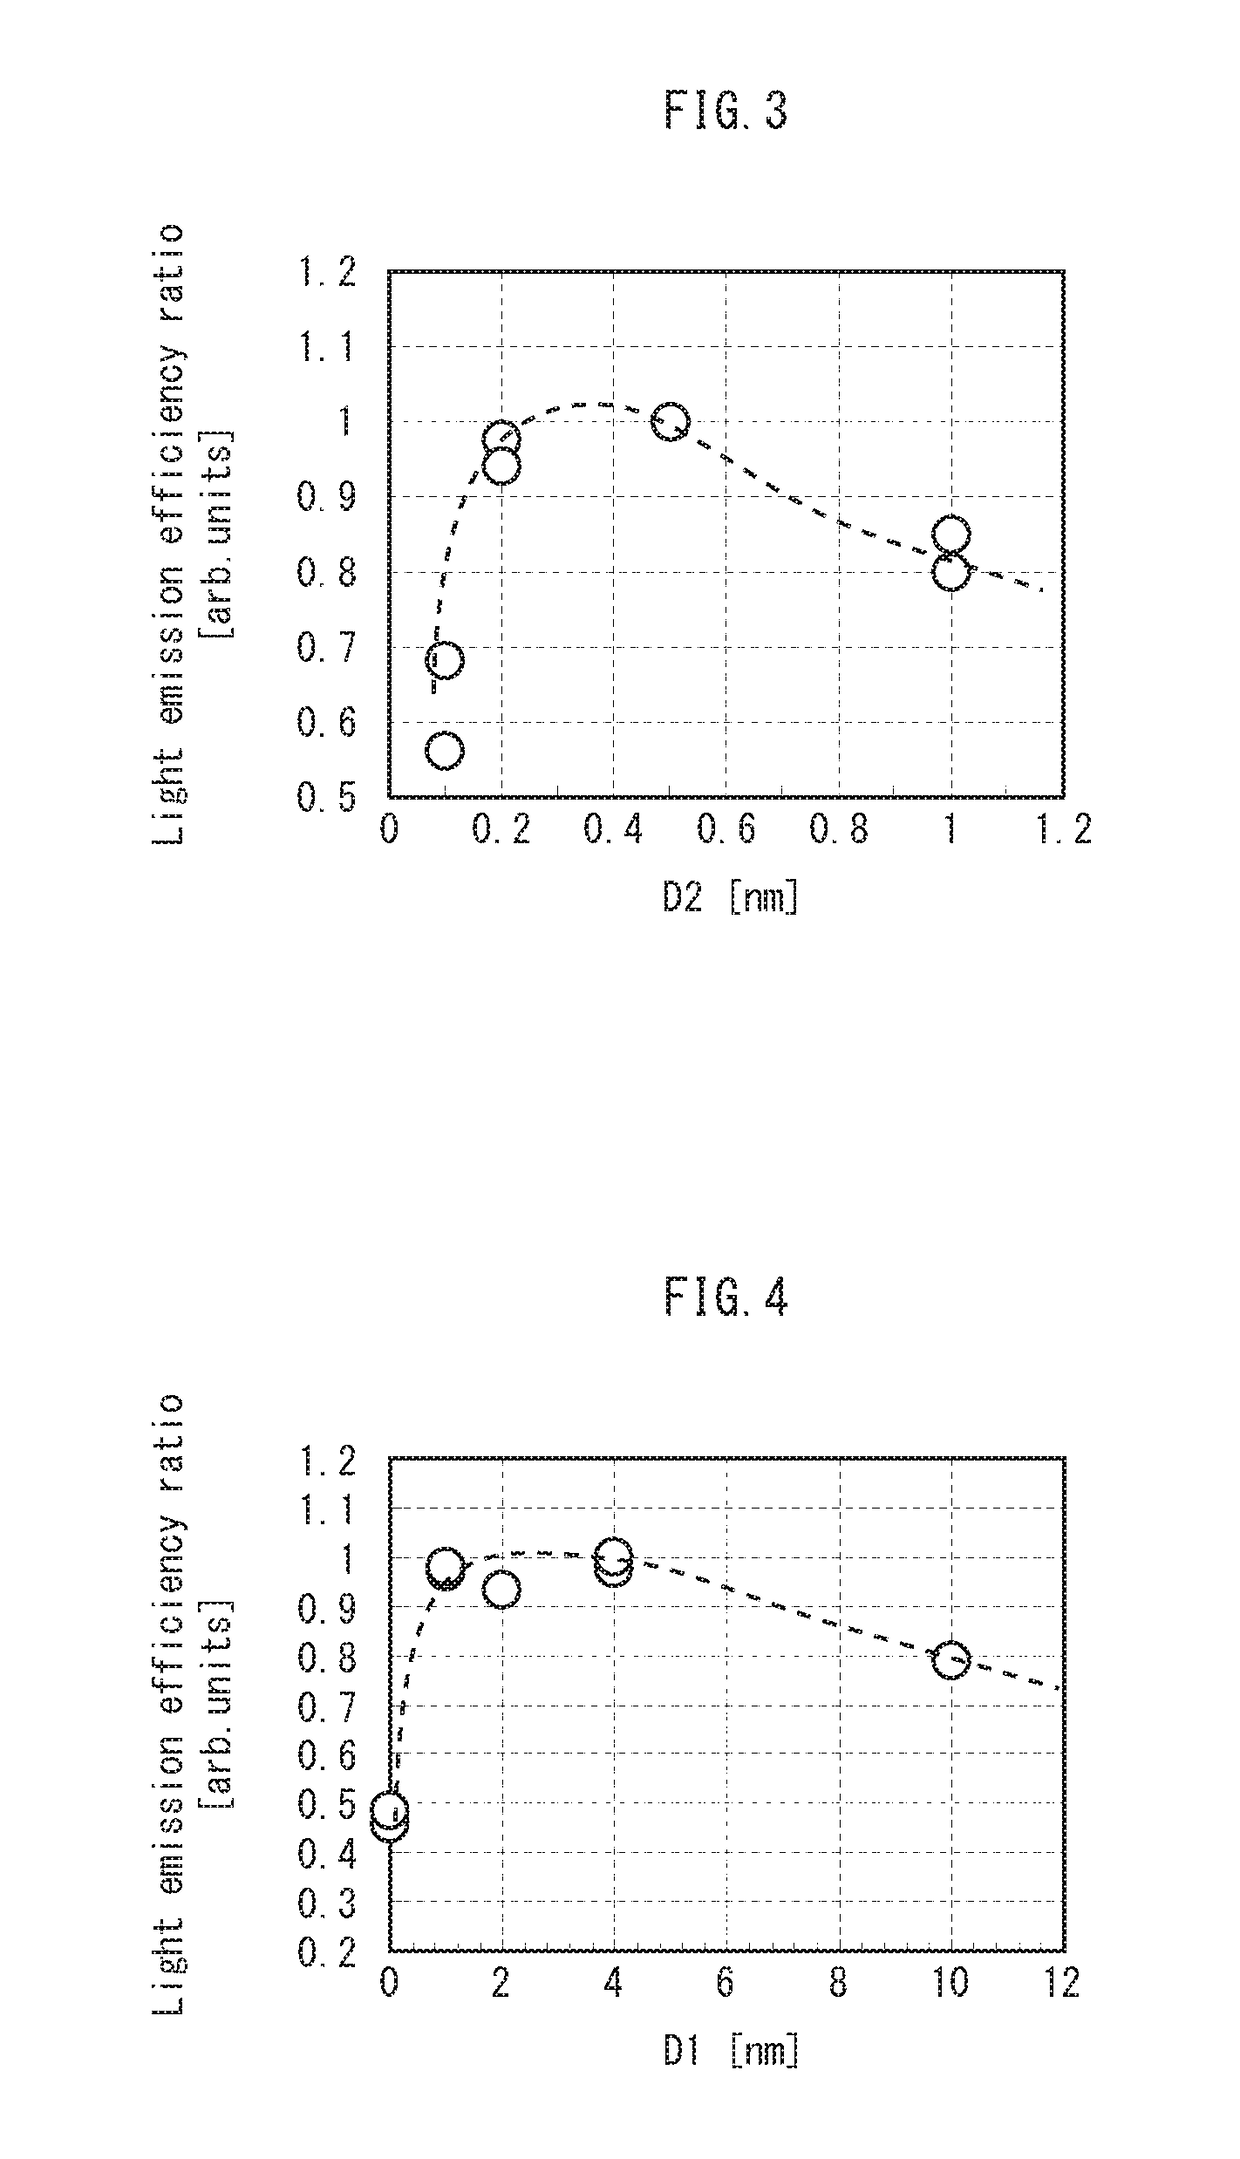 Organic EL element comprising first and second interlayers of specified materials and thicknesses, and method for manufacturing thereof